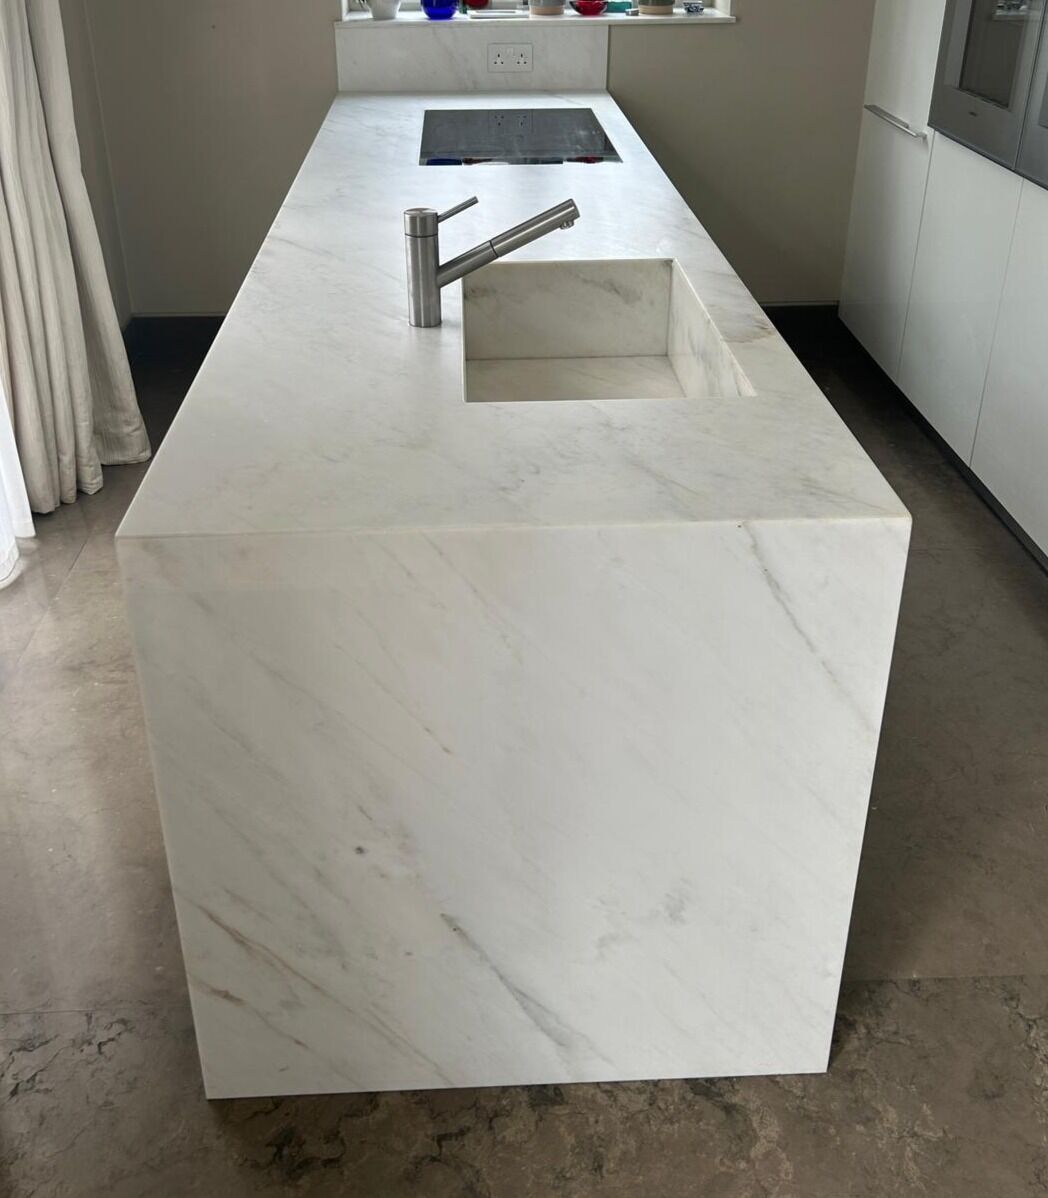 Marble is acid sensitive it is important to take extra care with festive drinks and food. 
#cleaningtips #cleanwithme #homehacks #lifestyletips #marble #limestone #kitchenworktops #luxurykitchen #kitchendesign #kitchensofinsta #sustainability #sustainableddesign